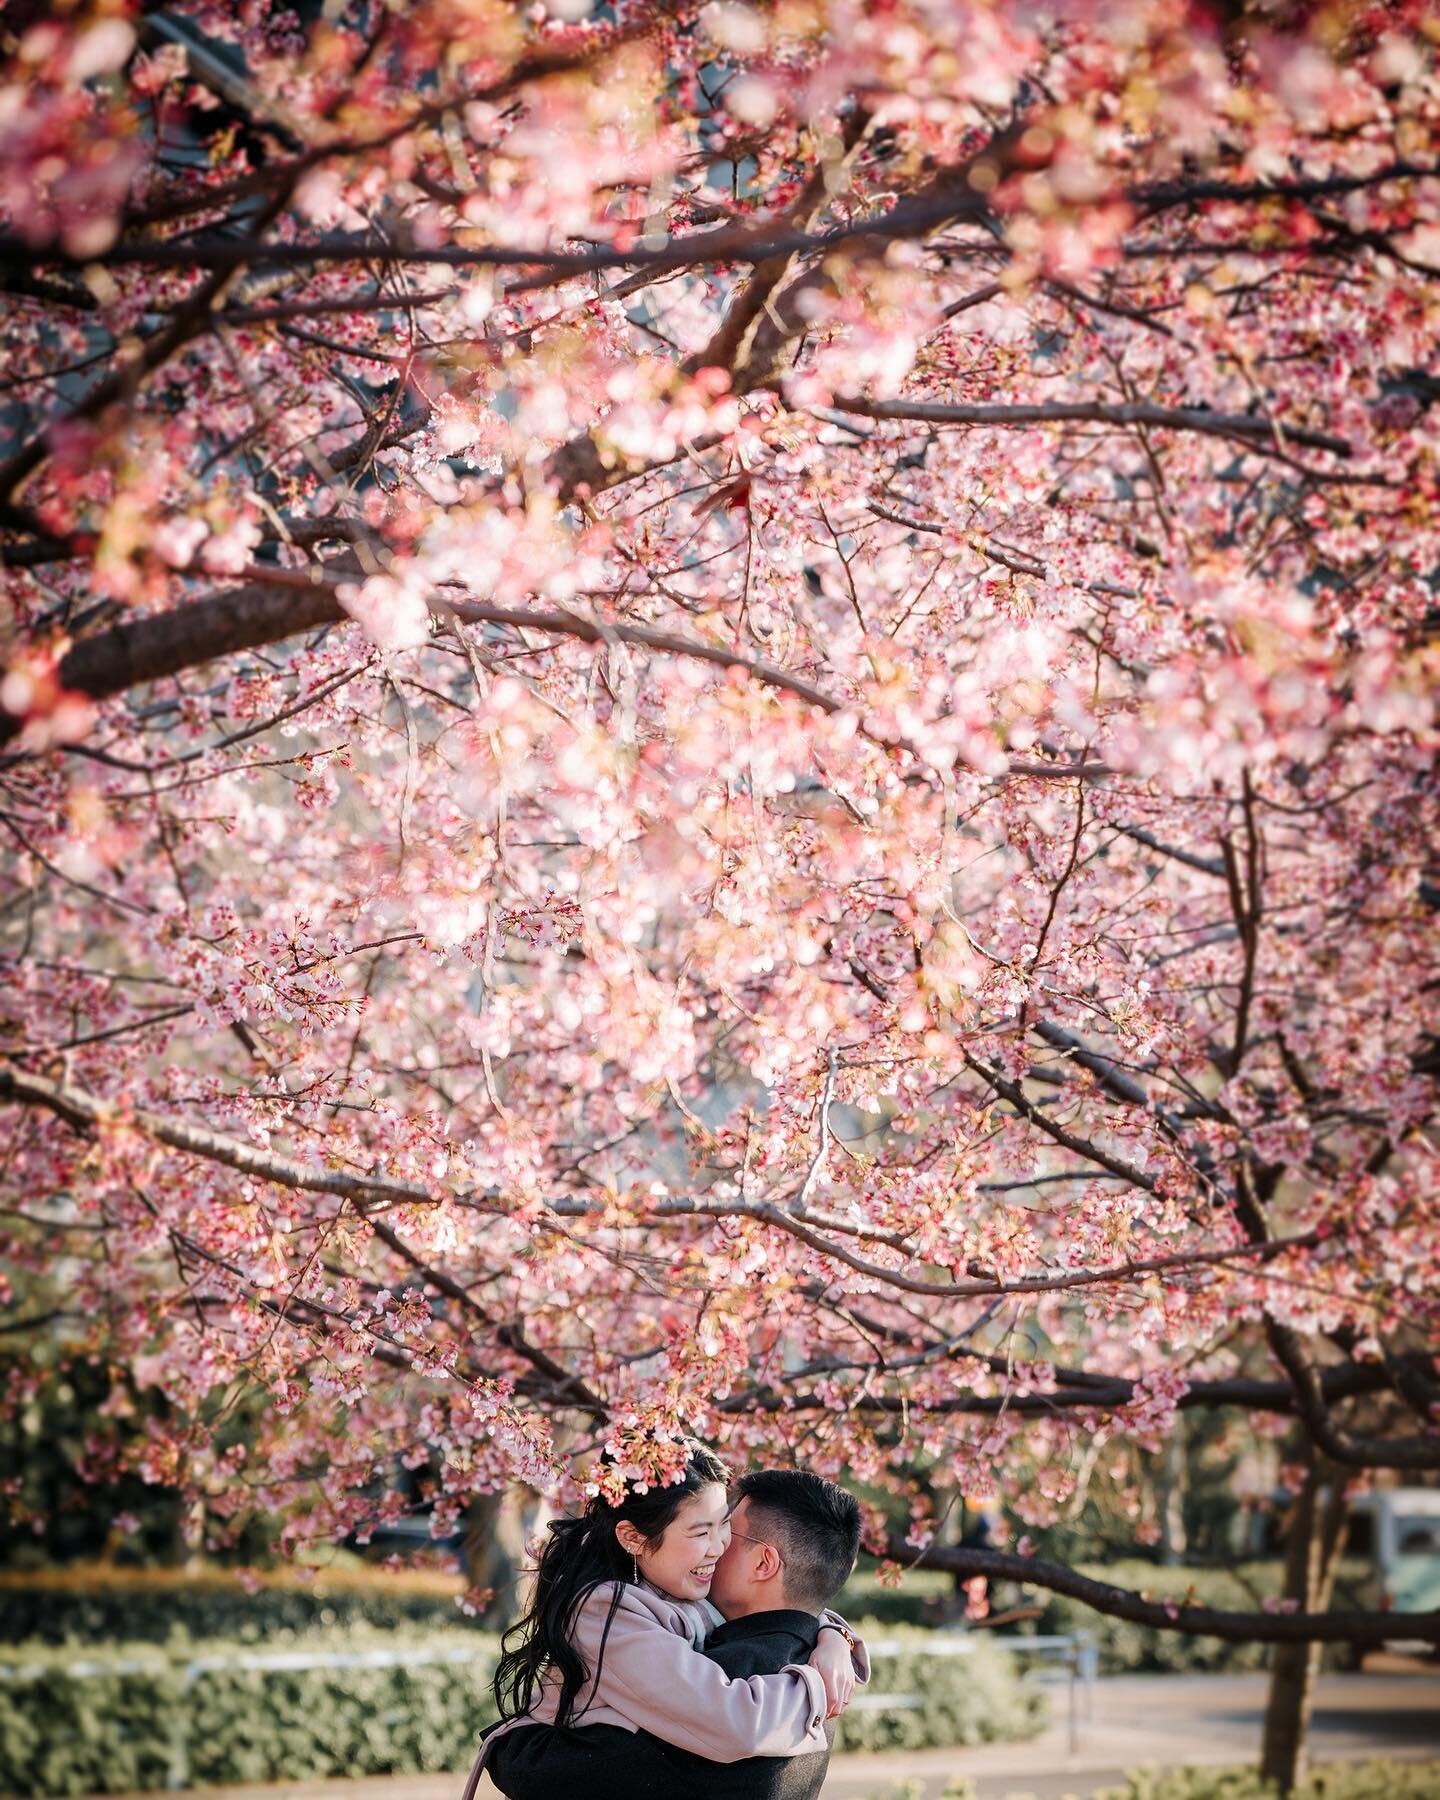 Wondering where the sun has gone this week 😂 my newly engaged couple under early blooming blossoms ❤️ sakuras are finally showing up everywhere! #gomphotography #tokyophotographer #japanphotographer #tokyoengagementphotographer #tokyoproposalphotosh